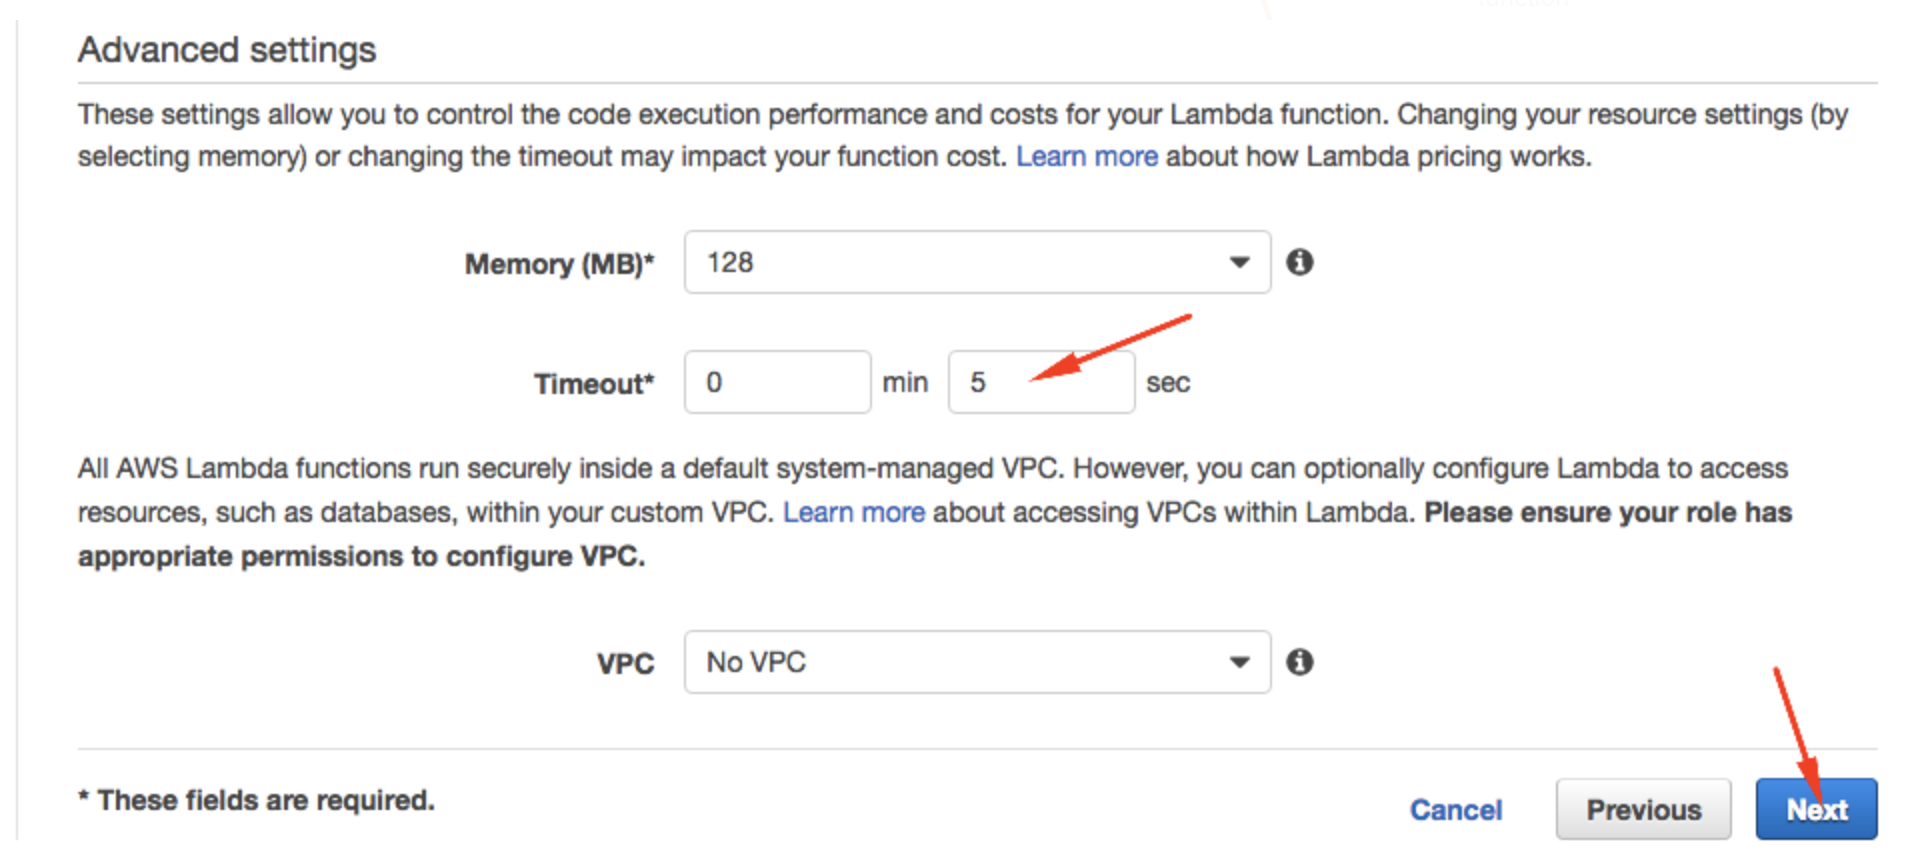 An image showing advanced settings for Lambda function in Opsgenie's Jira integration.